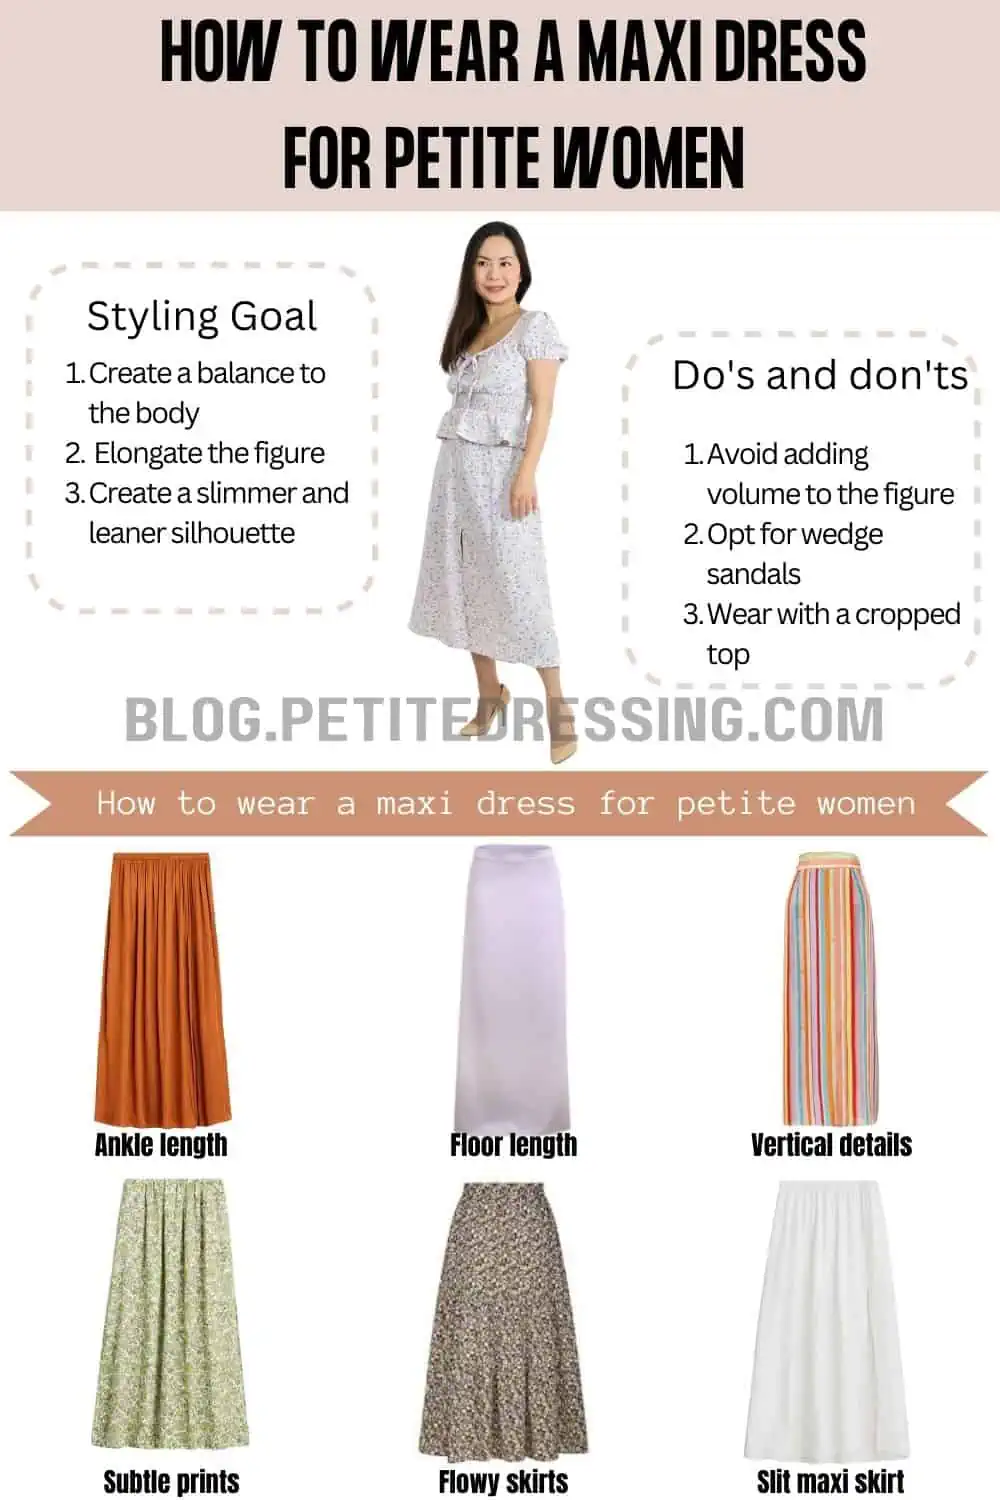 How to Style a Maxi Skirt This Fall 3 Street Style Looks to Emulate   FASHION Magazine